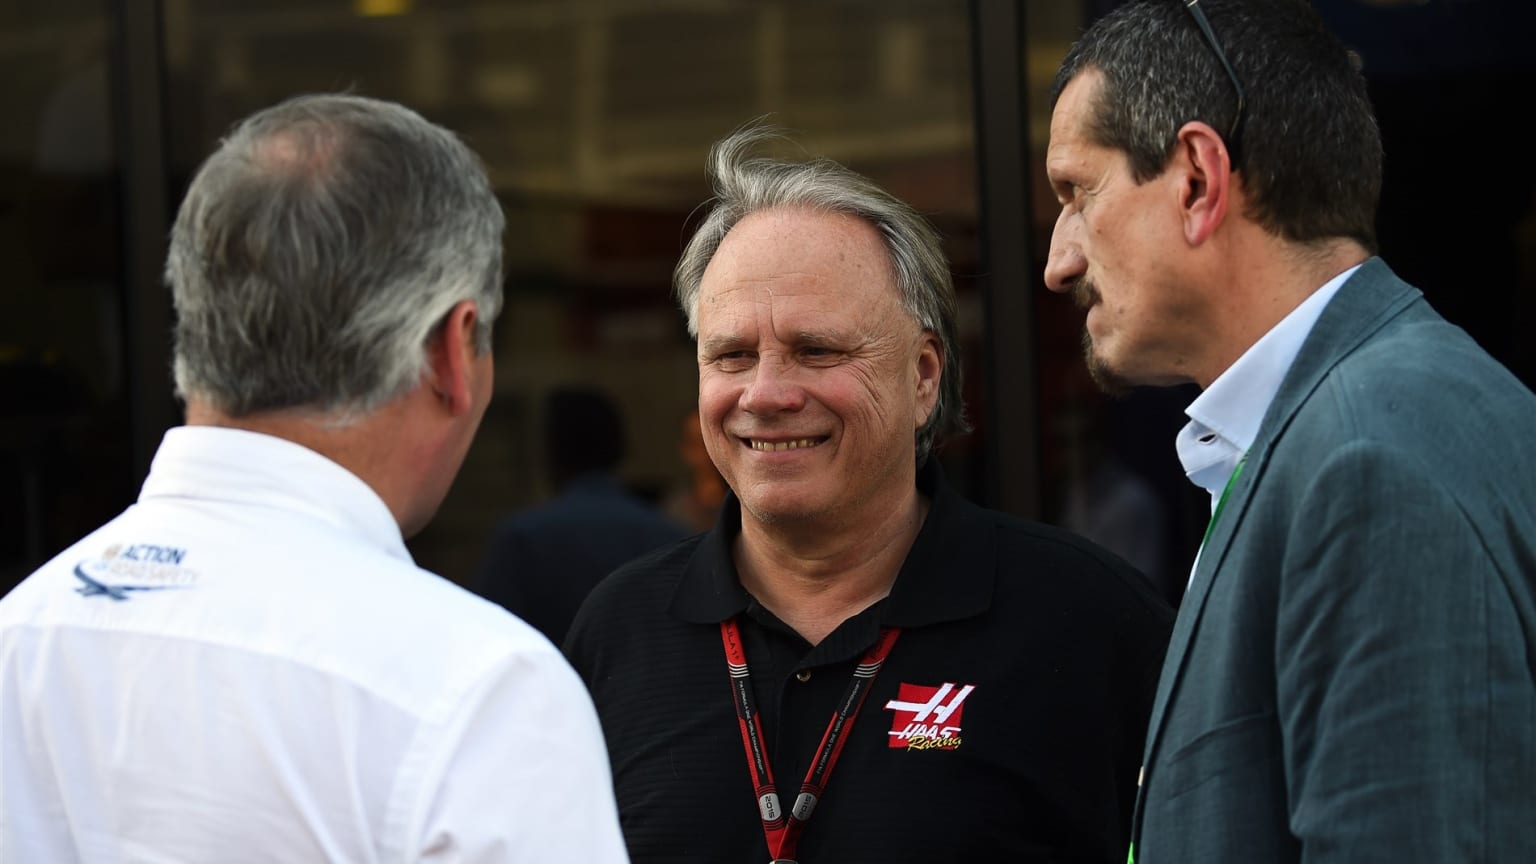 Haas to debut car at first test of 2016